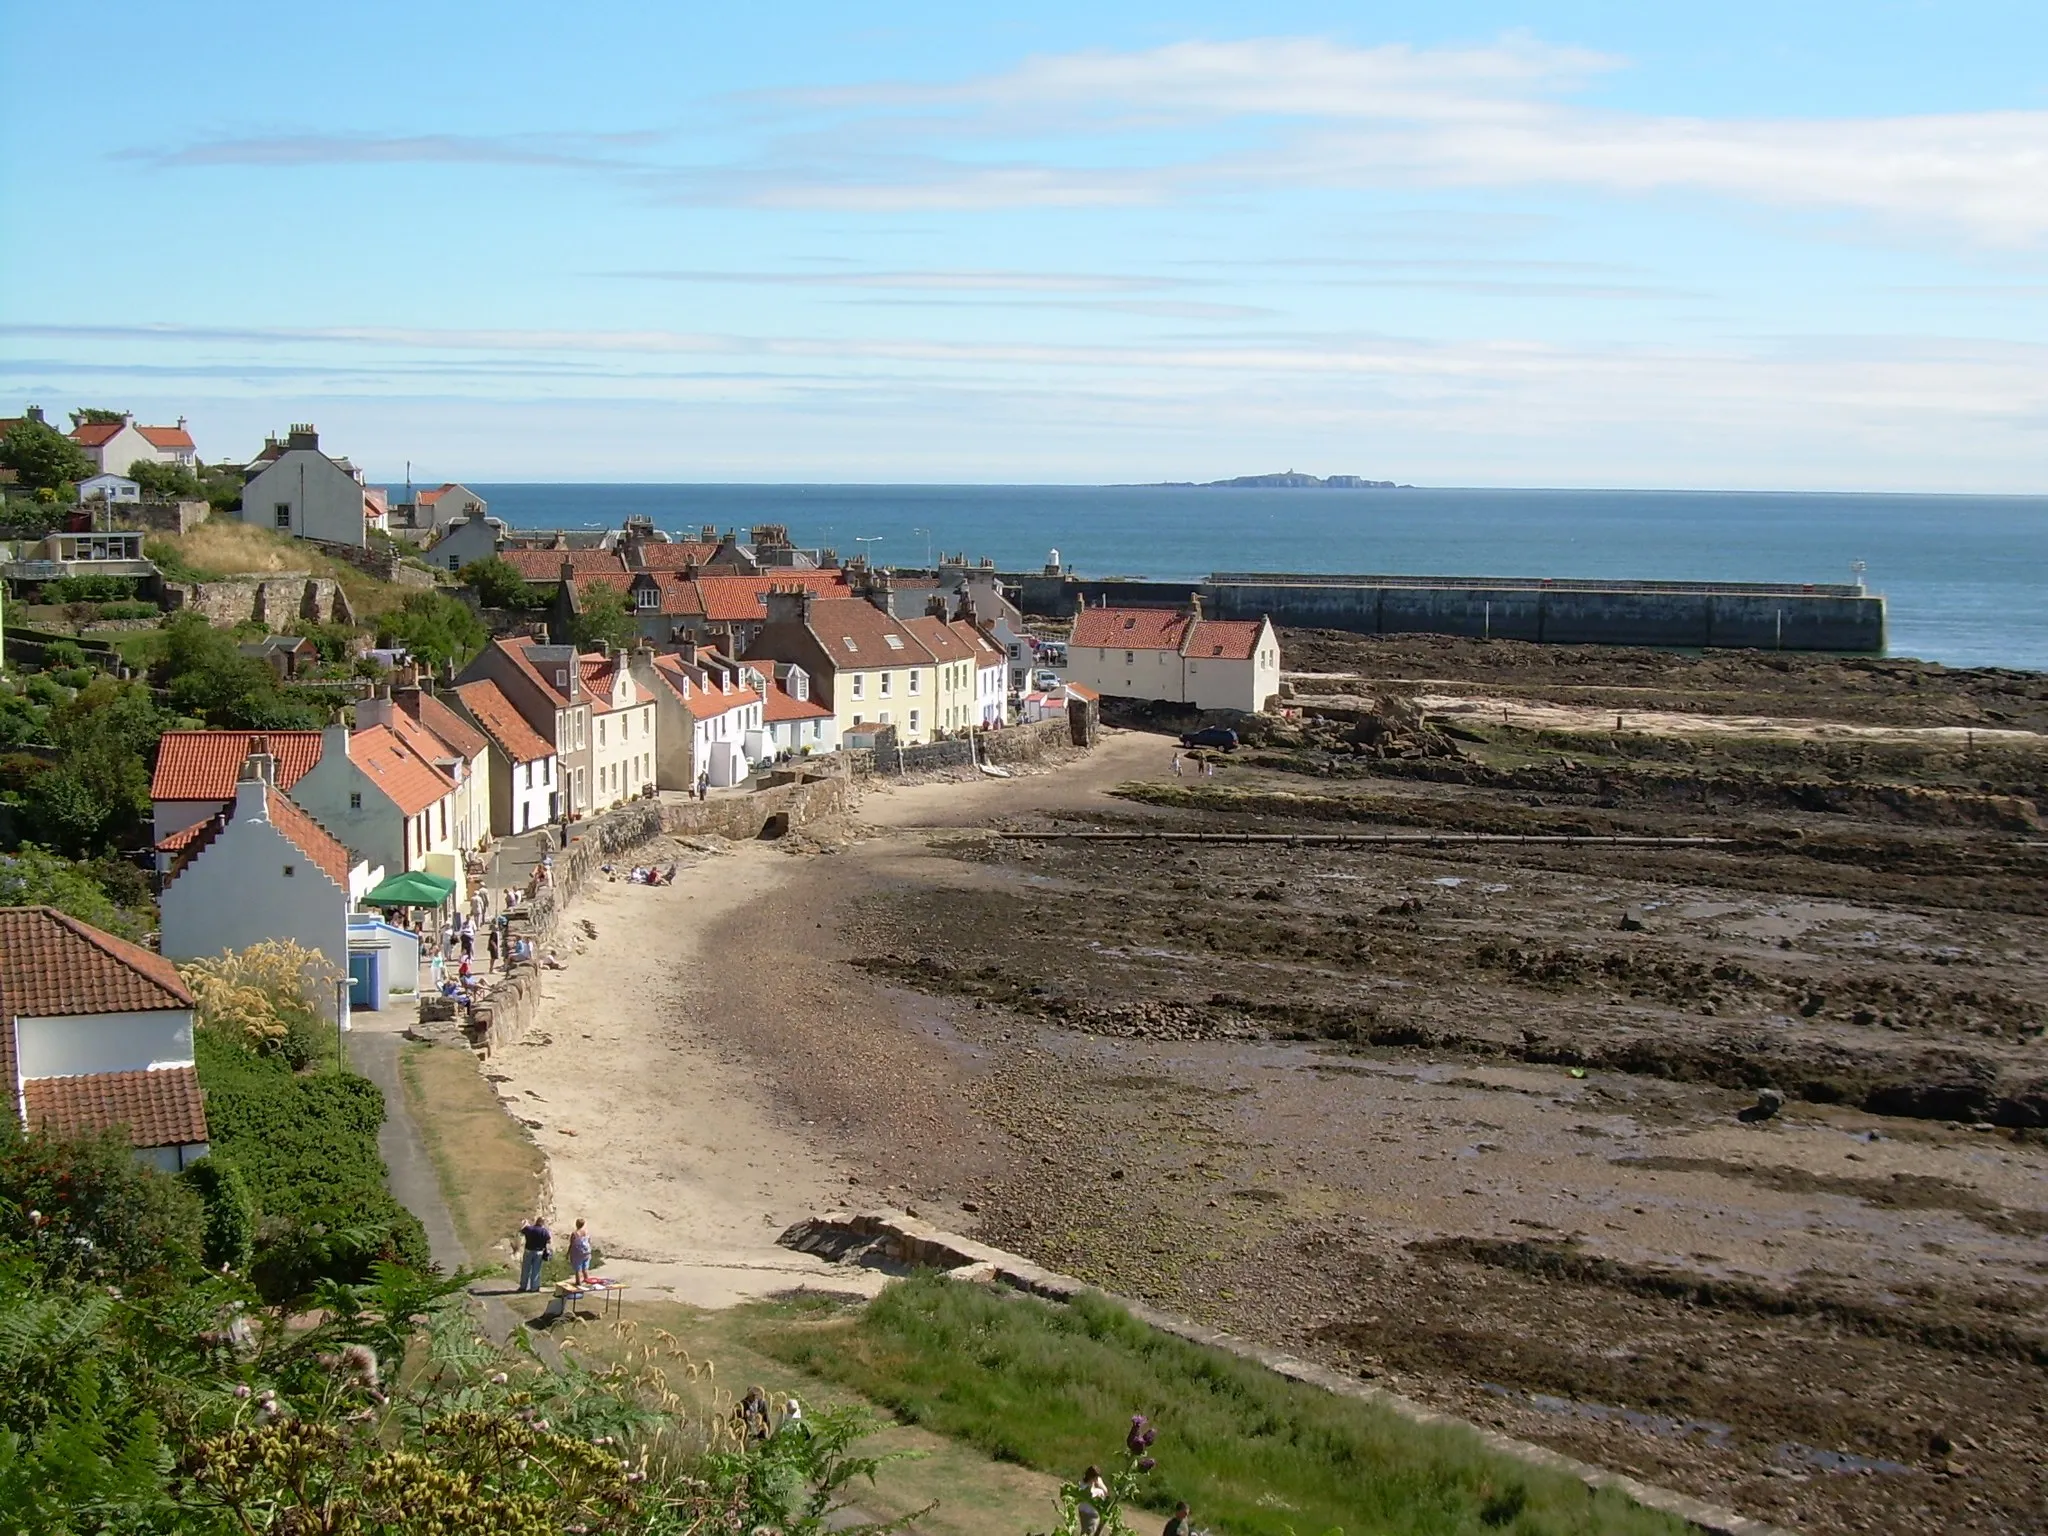 Photo showing: The West Shore, Pittenweem seen from the West Braes
Self-made
2006-08-12 11:50:32

Allan McBain